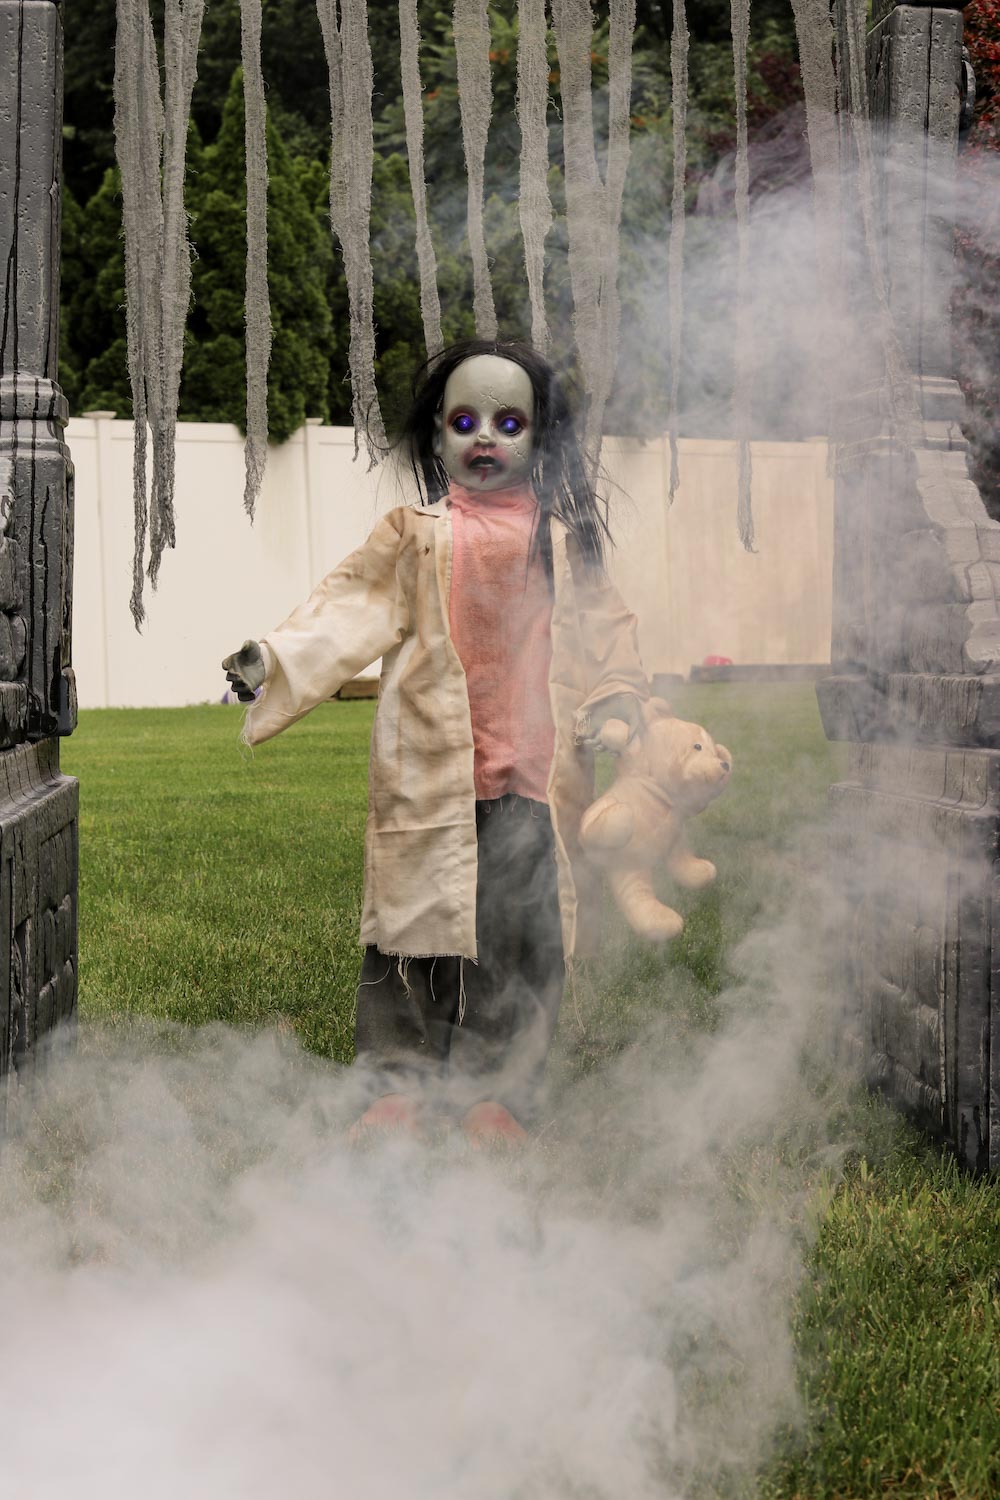 A zombie girl holding a stuffed animal in a foggy yard.